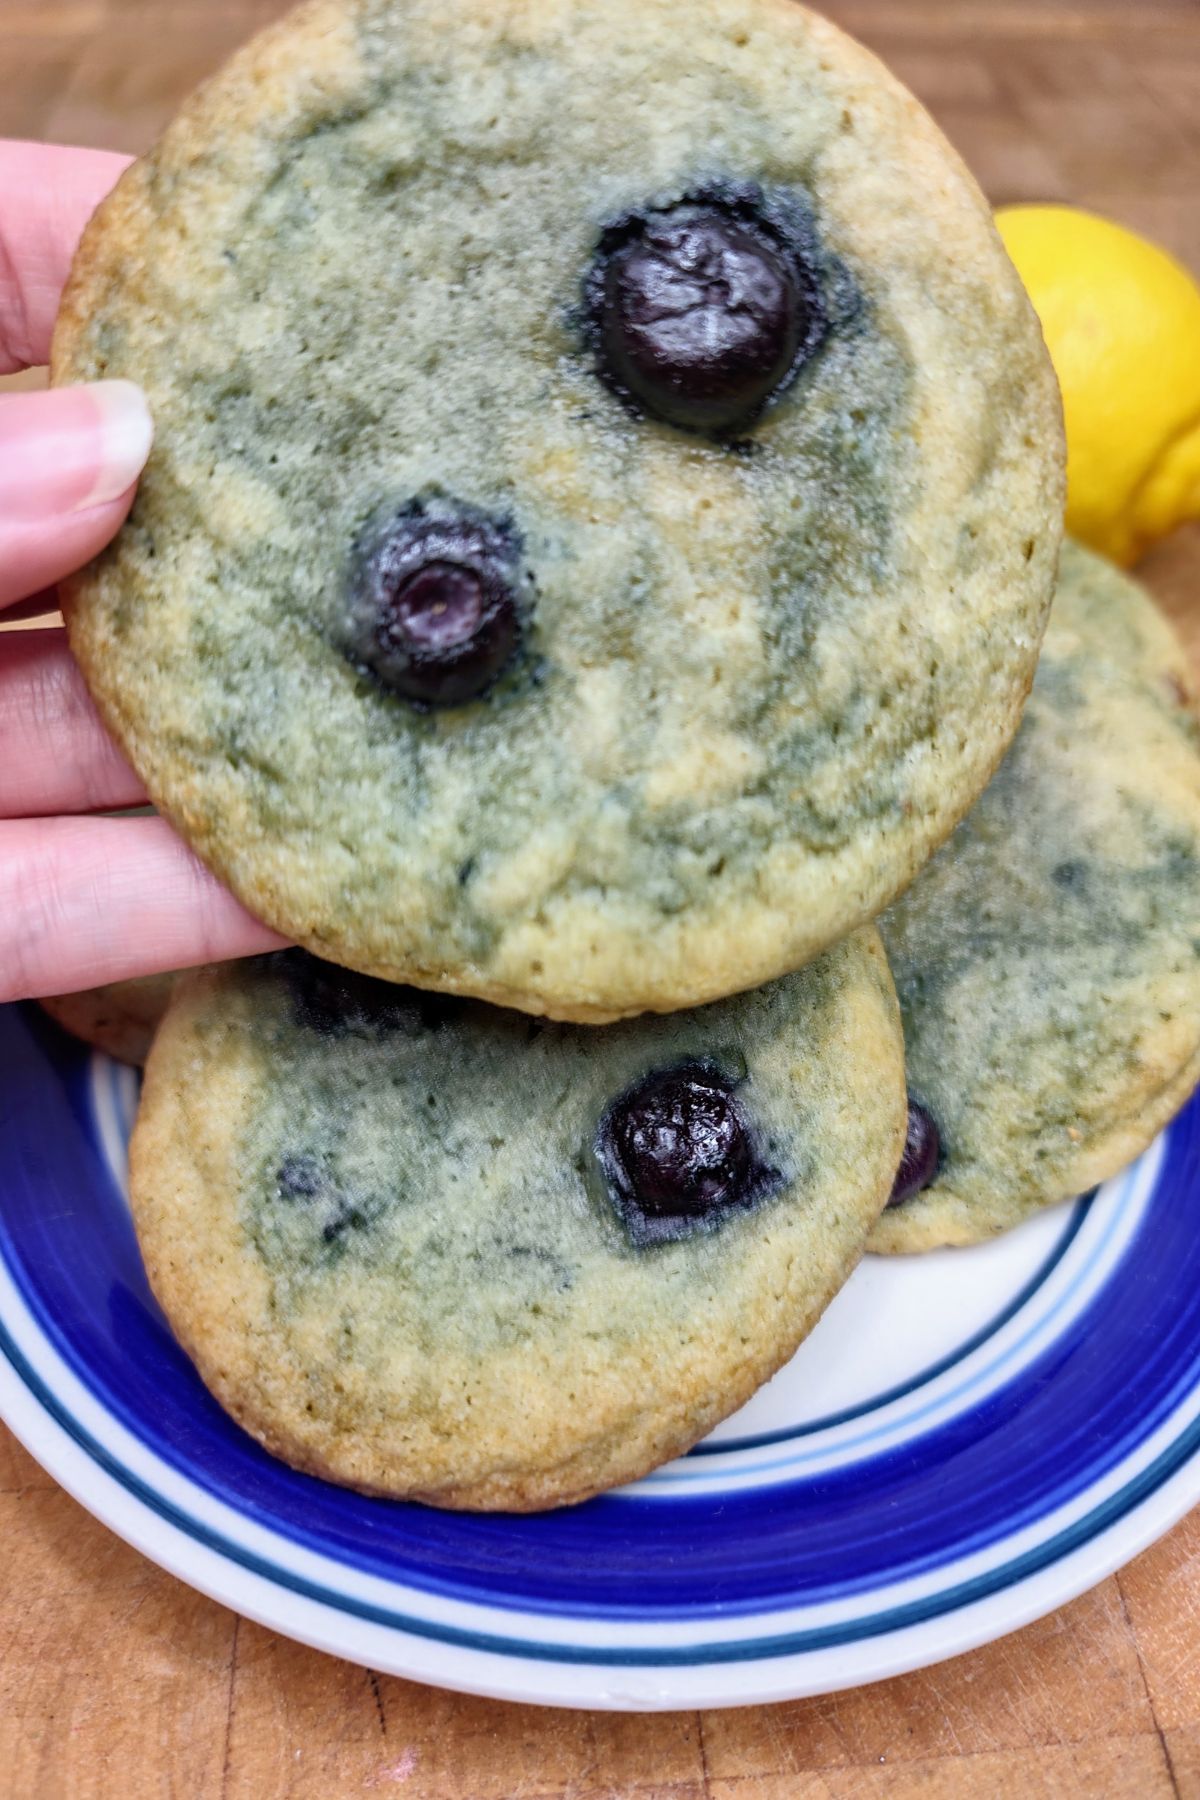 Hand holding a lemon blueberry cookie over a plate.